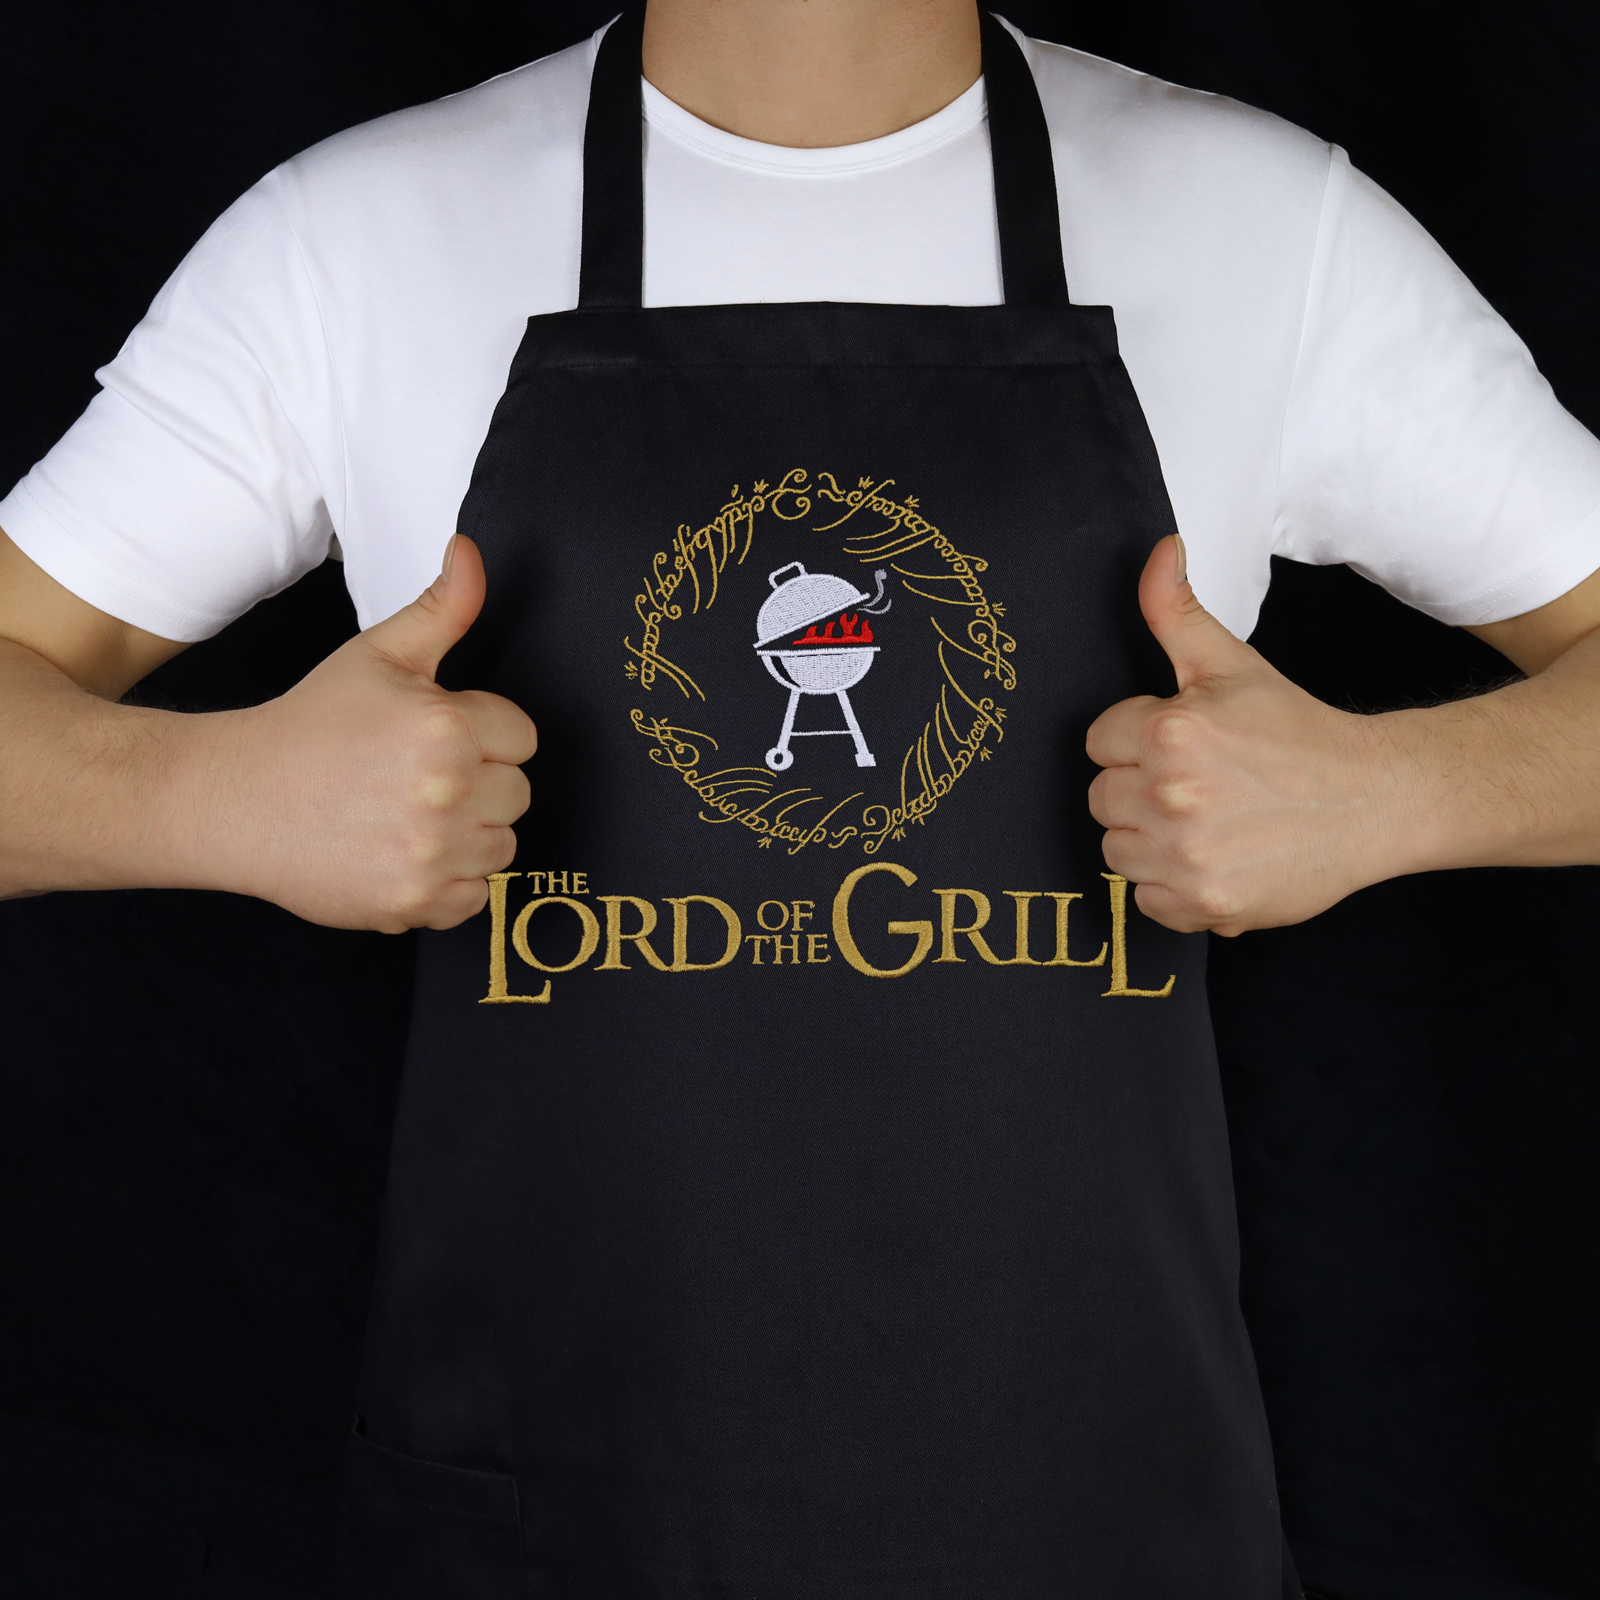 The lord of the grill - Grillschürze